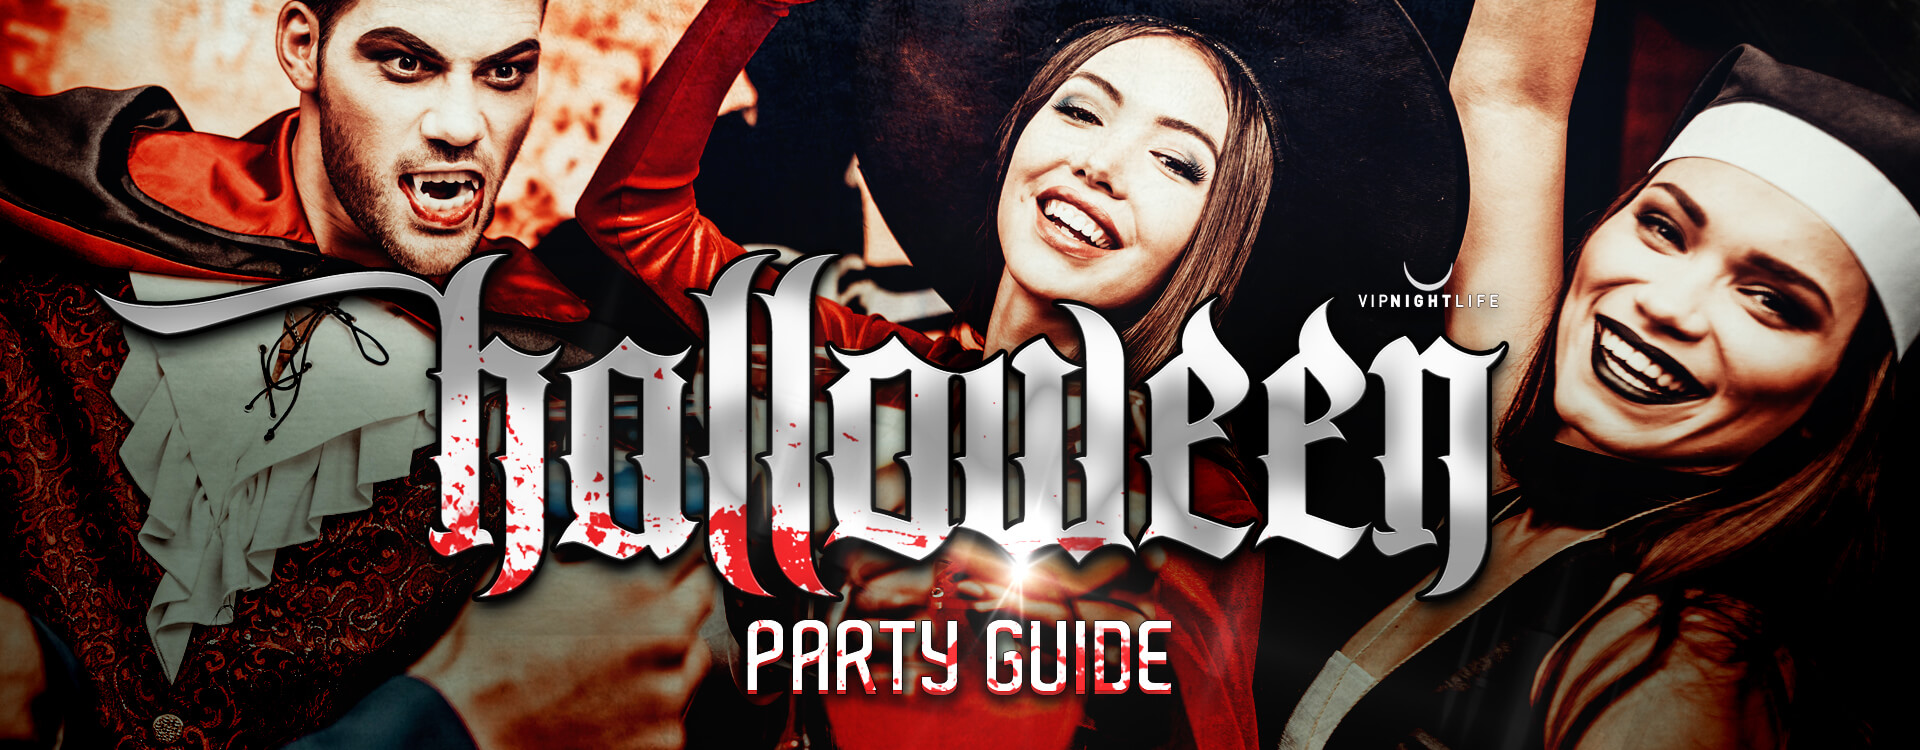 Halloween Party Guide